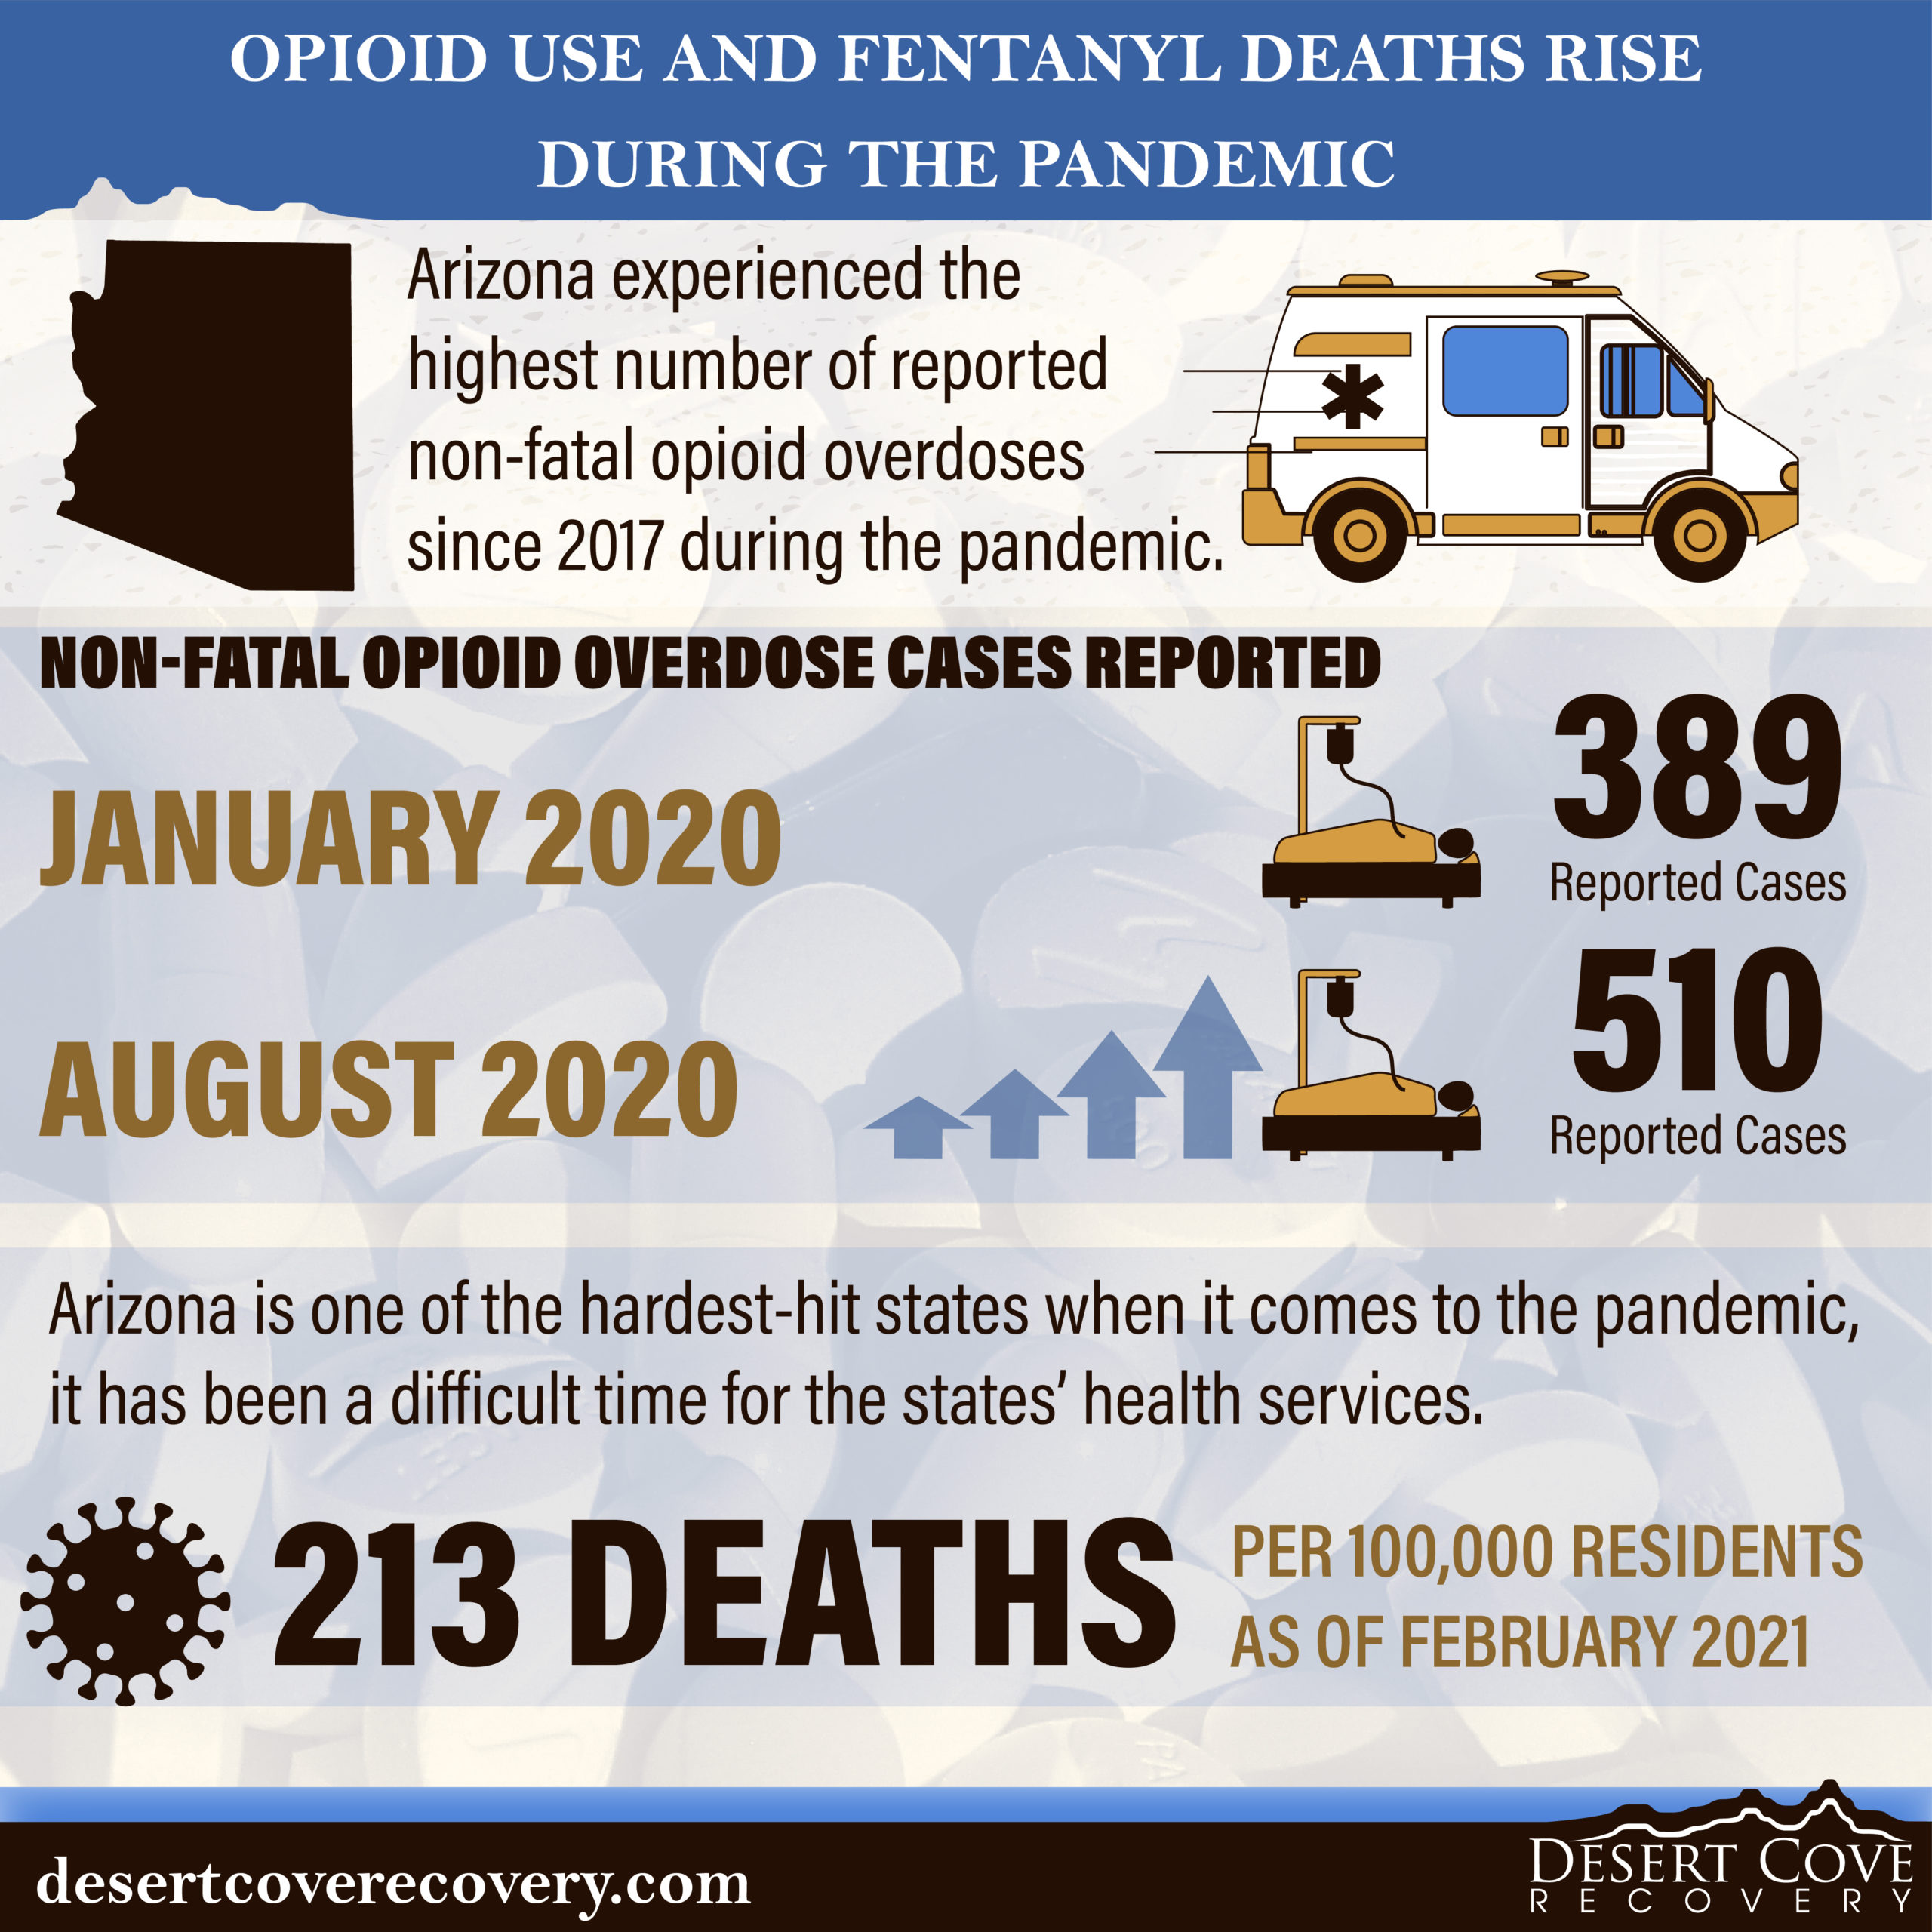 opioid and fentanyl use